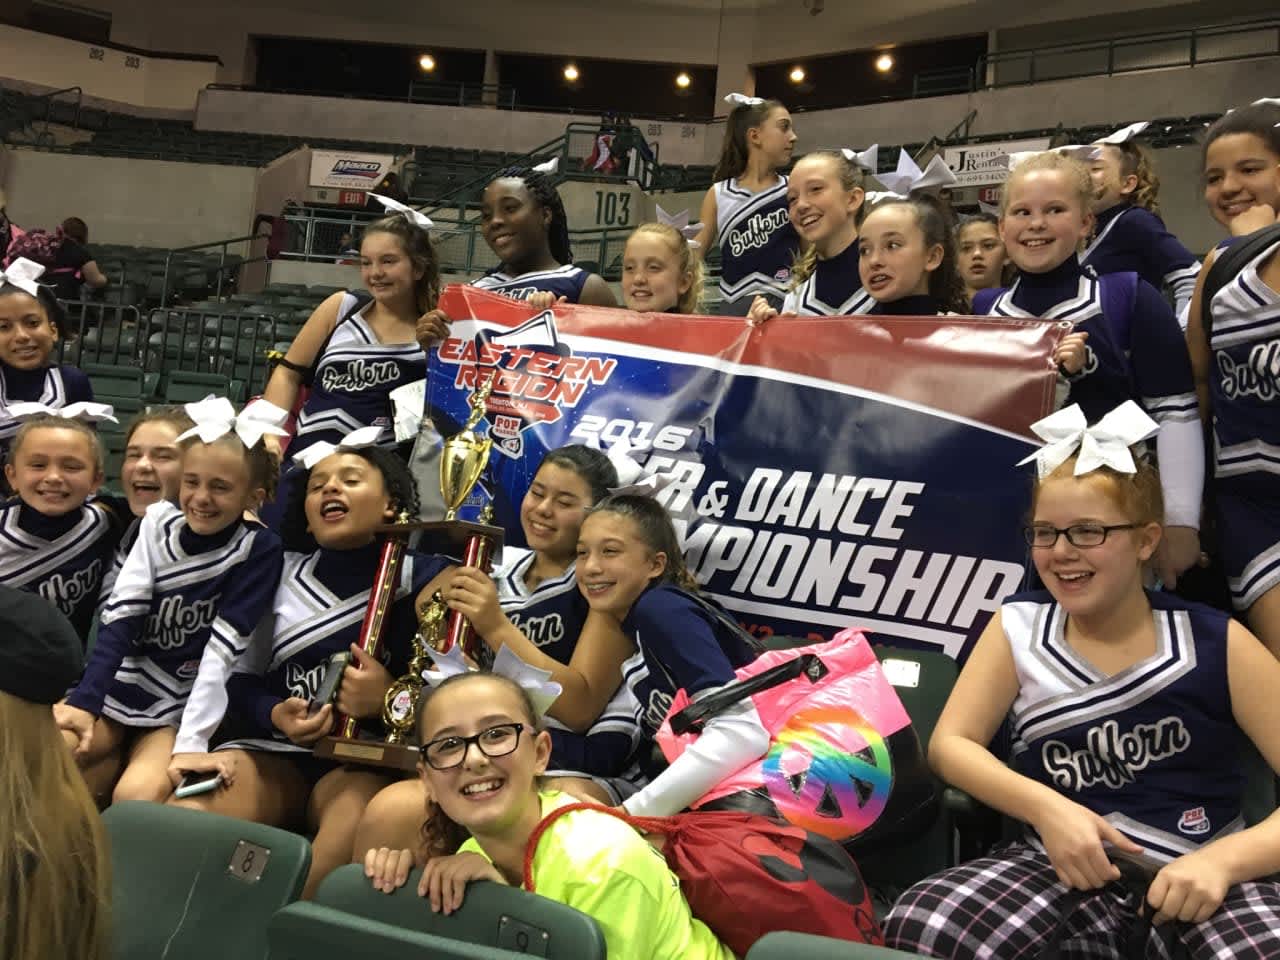 The Suffern Midget Mounties peewee cheer squad is heading to the national Pop Warner cheer competition at Disney World on Dec. 7.